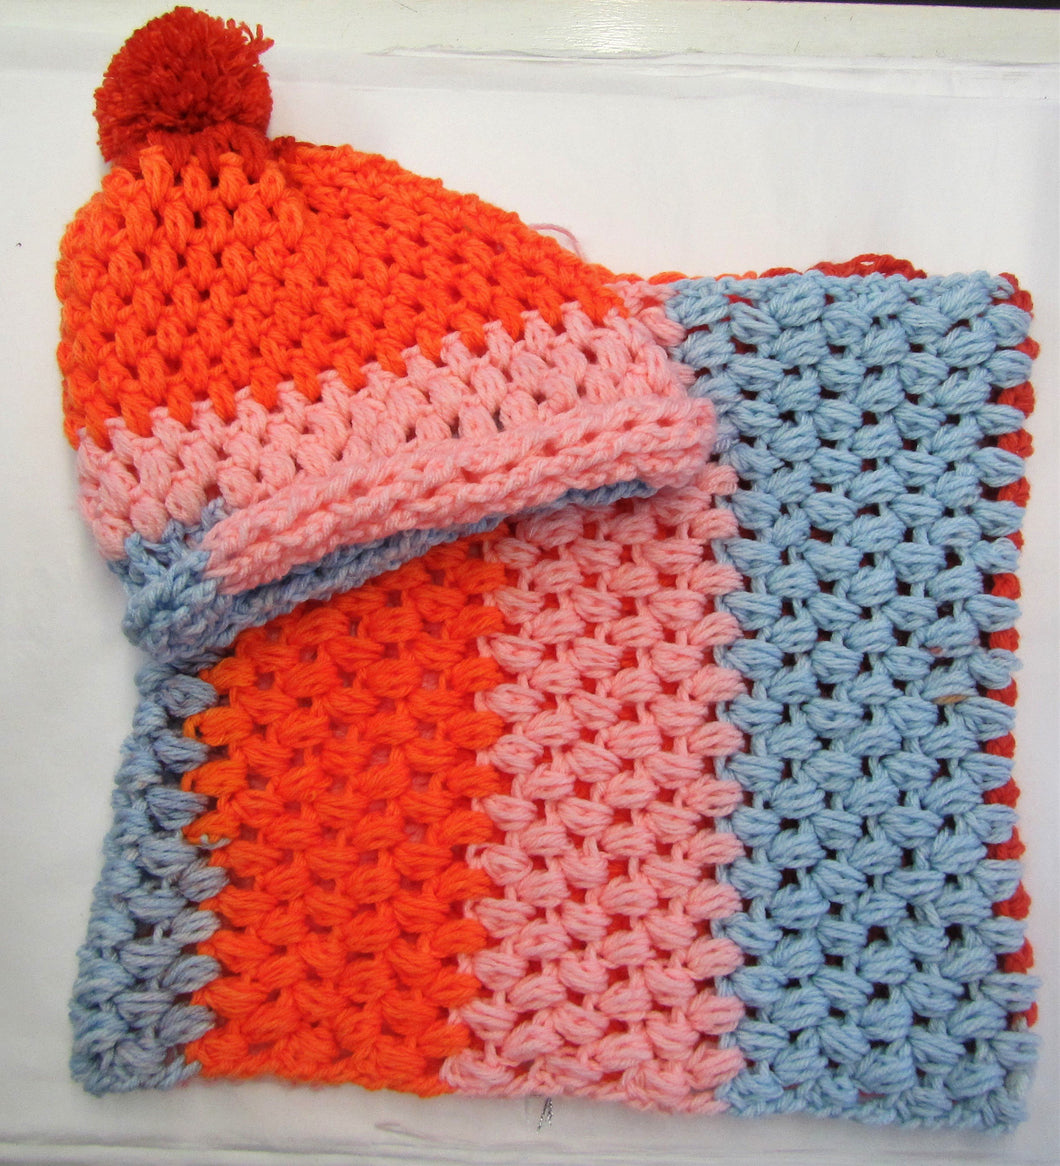 Handcrafted crochet pink, orange and blue woollen hat and snood set